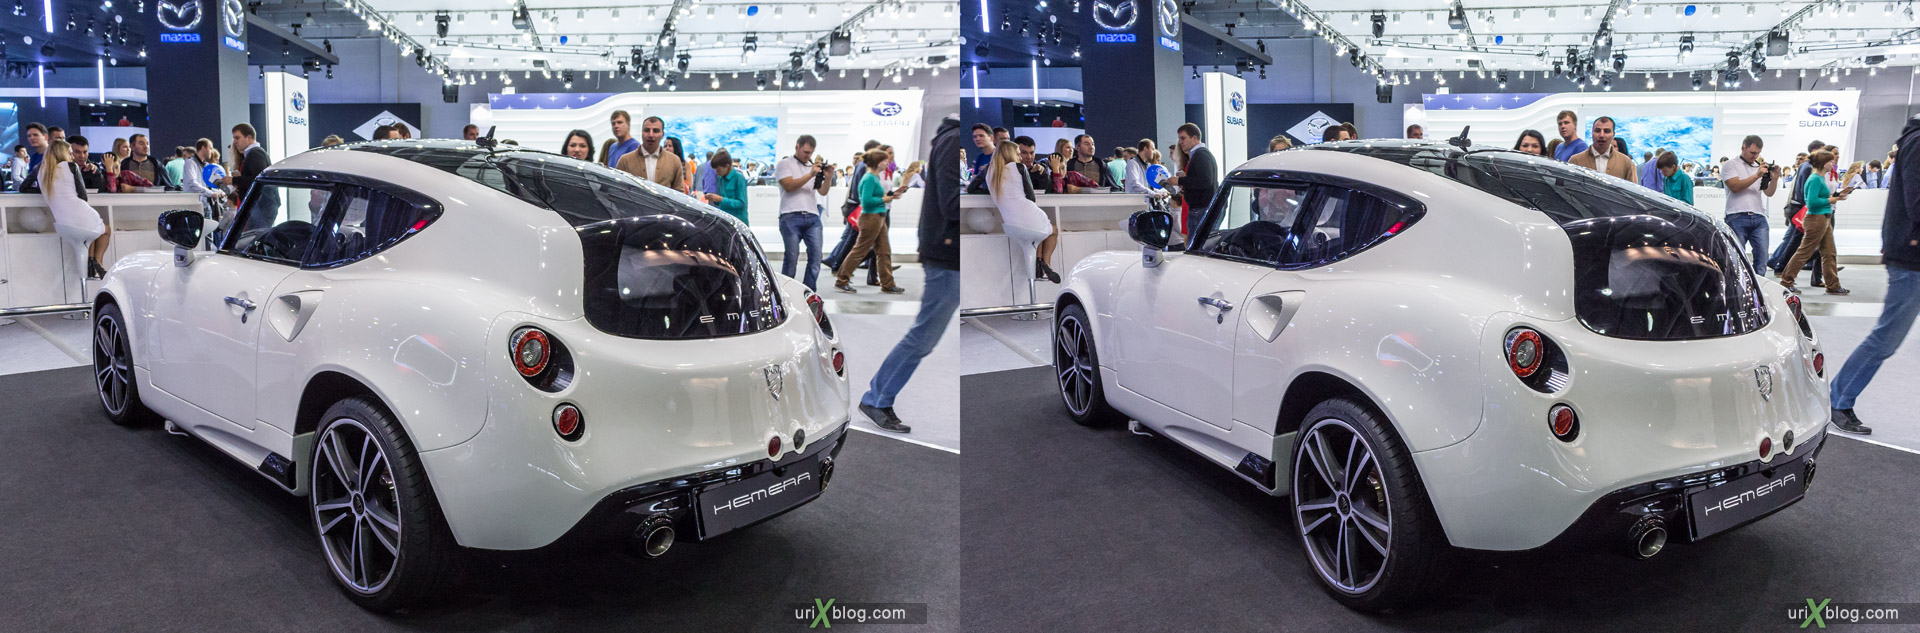 2014, PGO Hemera, Moscow International Automobile Salon, MIAS, Crocus Expo, Moscow, Russia, augest, 3D, stereo pair, cross-eyed, crossview, cross view stereo pair, stereoscopic